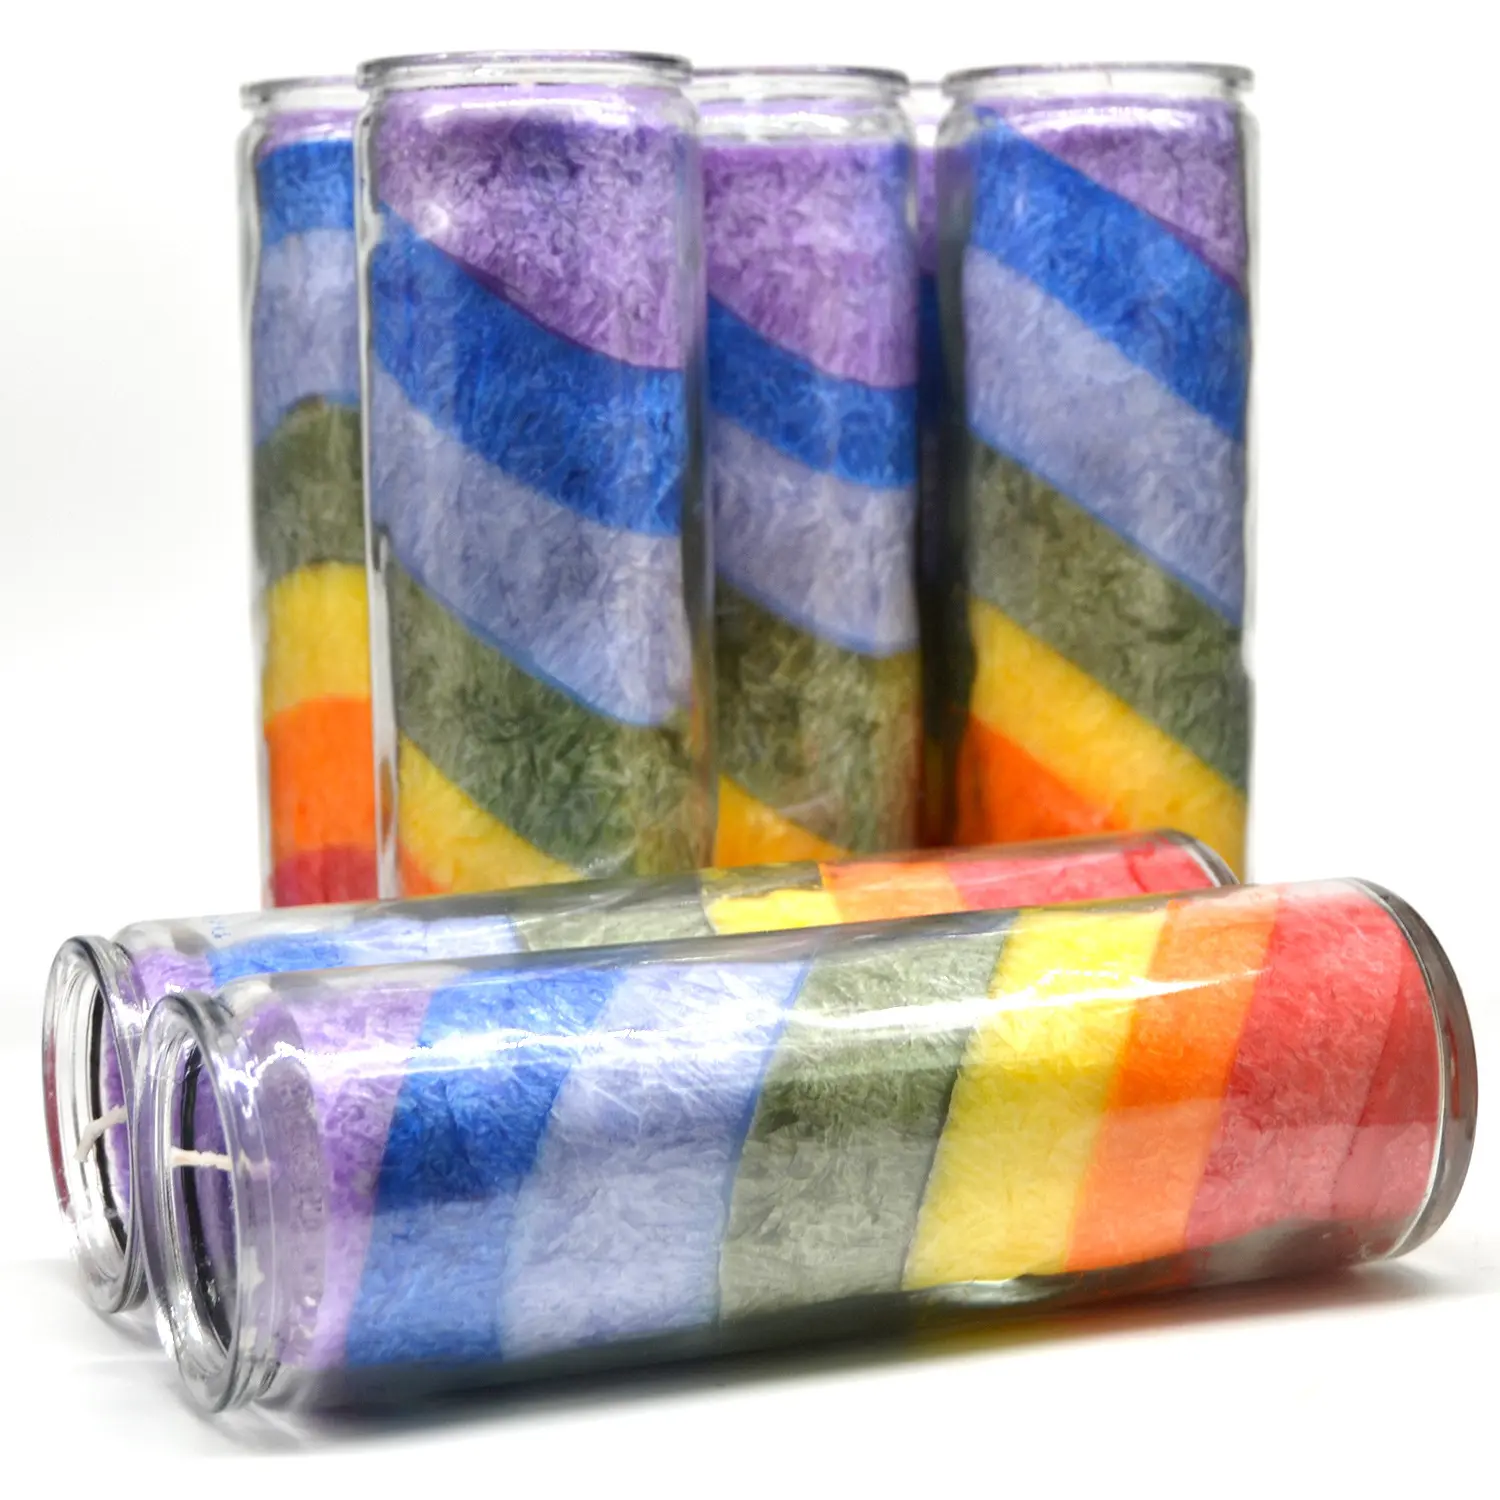 Wholesale 7 Days Candles 7 Layers Church Blessing Ceremony Rainbow Chakra Candle Spiritual Chakra Religious Glass Pillar Candle